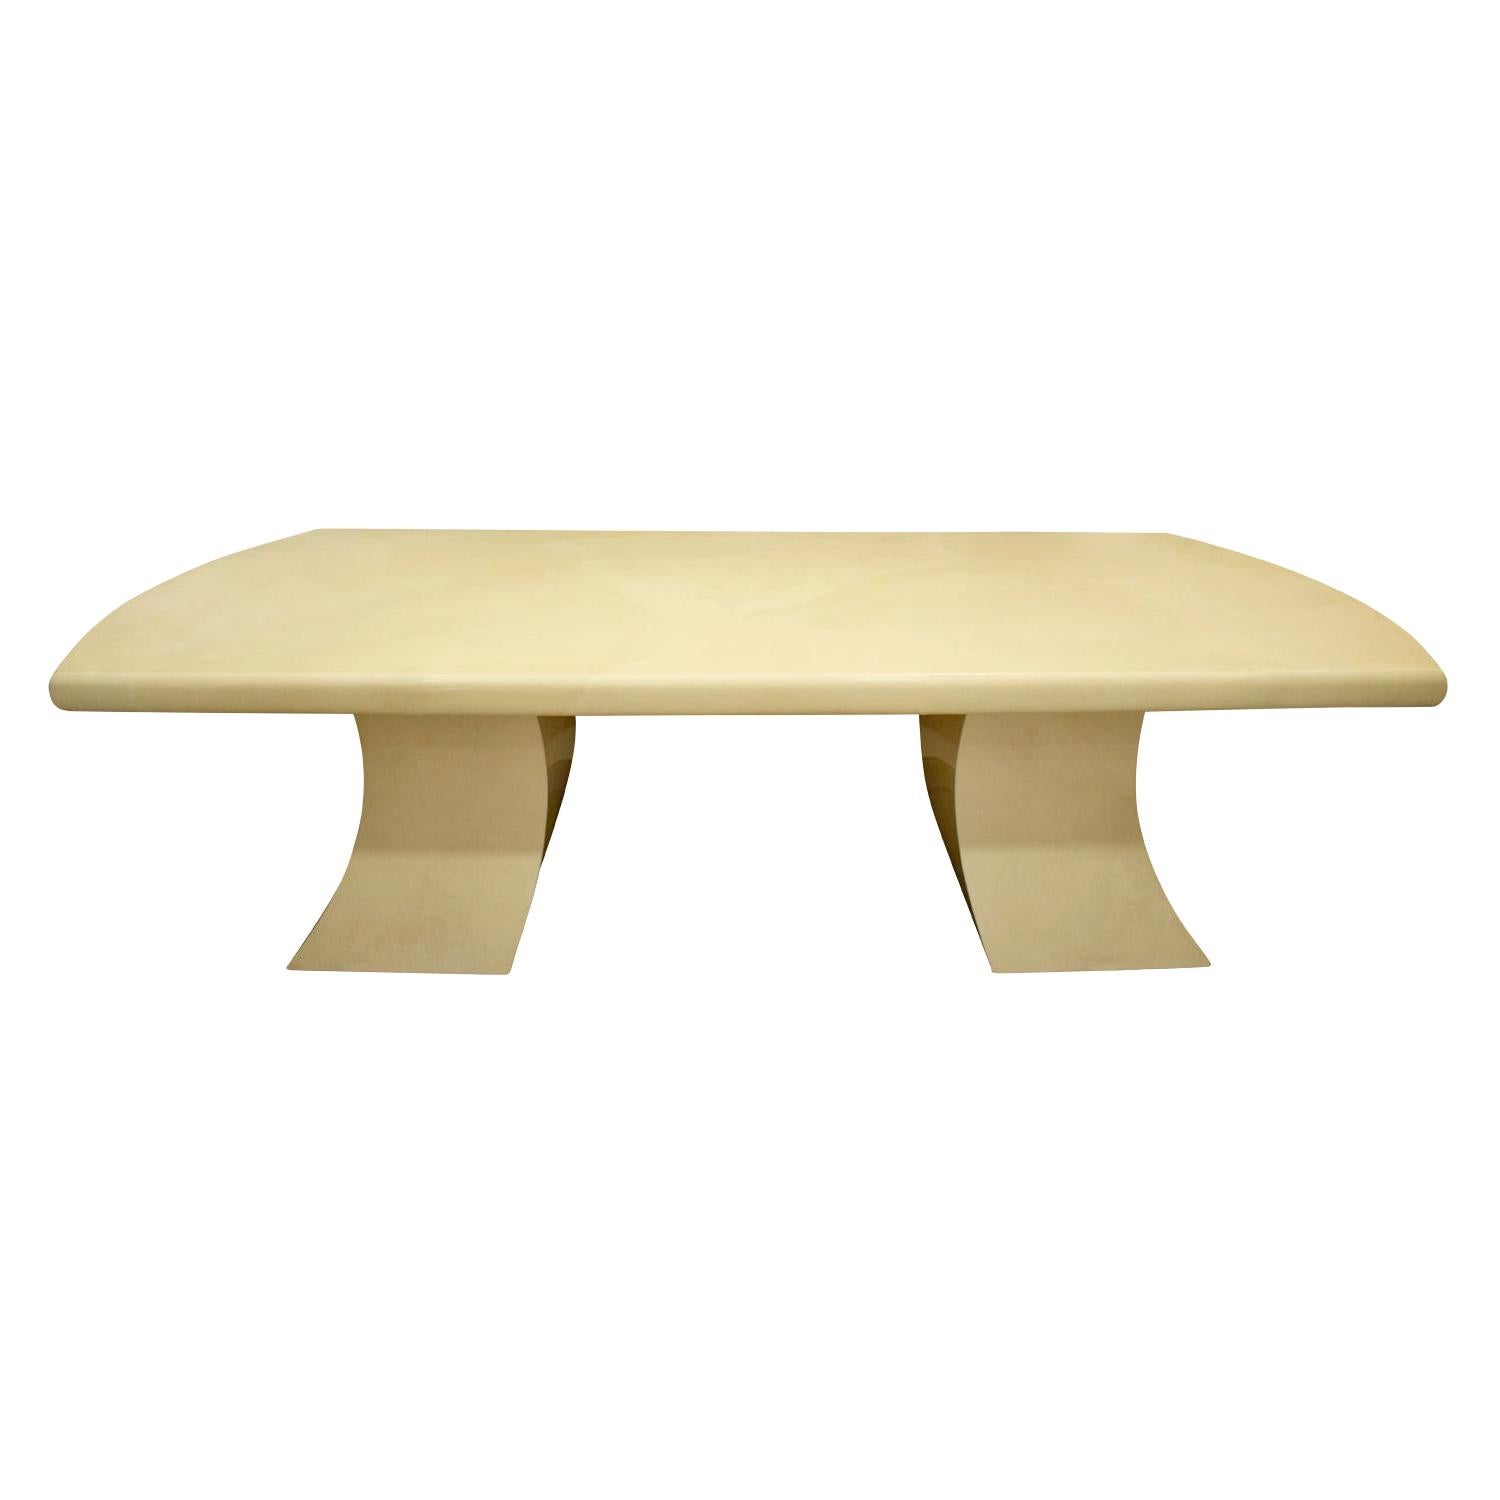 Karl Springer "Pagoda Style Dining Table" in Lacquered Goatskin, 1980s